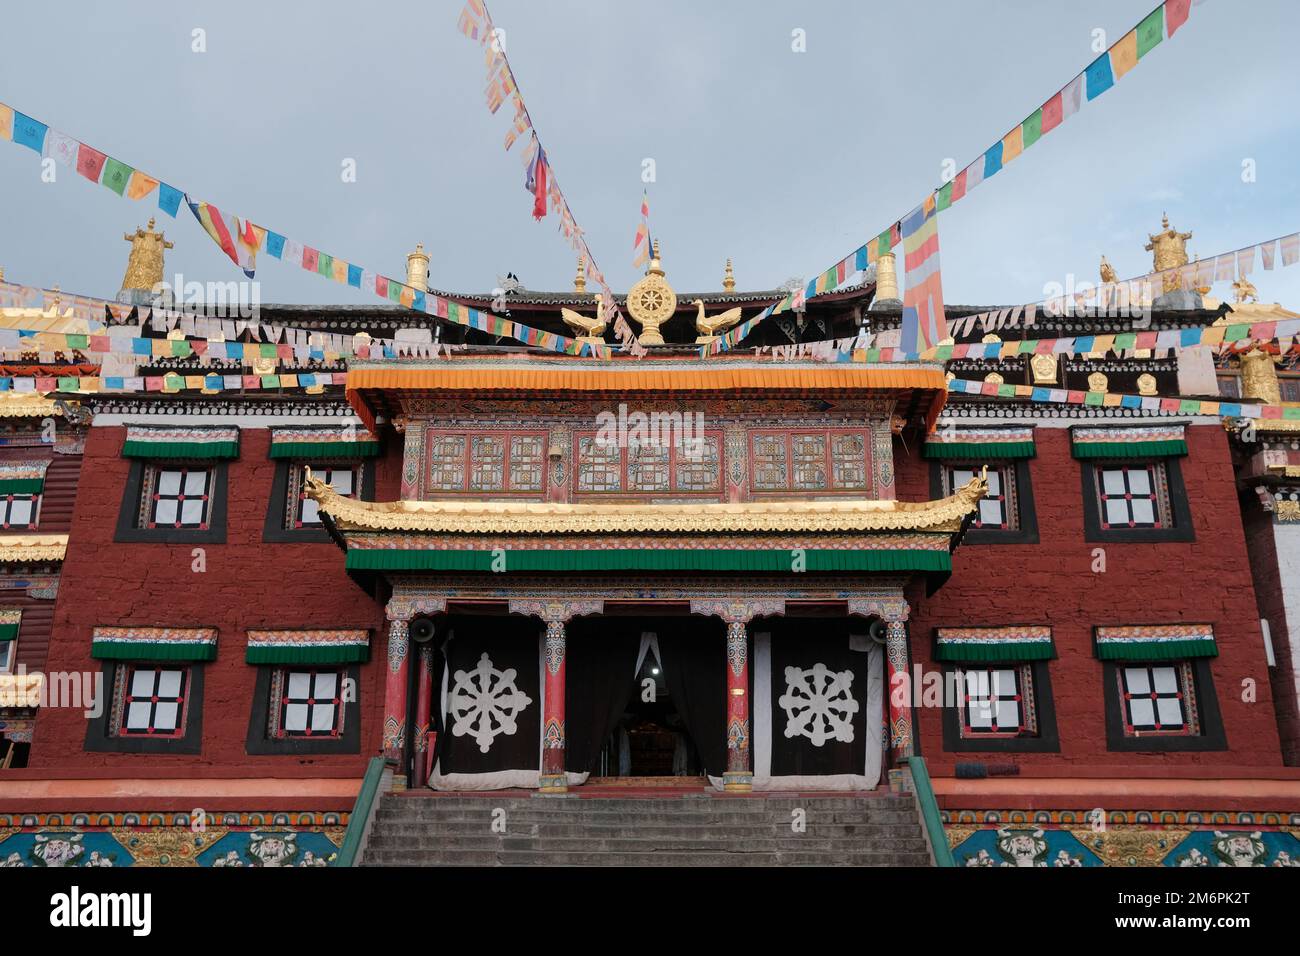 Tibetan architecture. Traditional tibetan buddhist temple with prayer flags in the sky. Buddhist temple red fasade with golden ornaments and symbols. Stock Photo